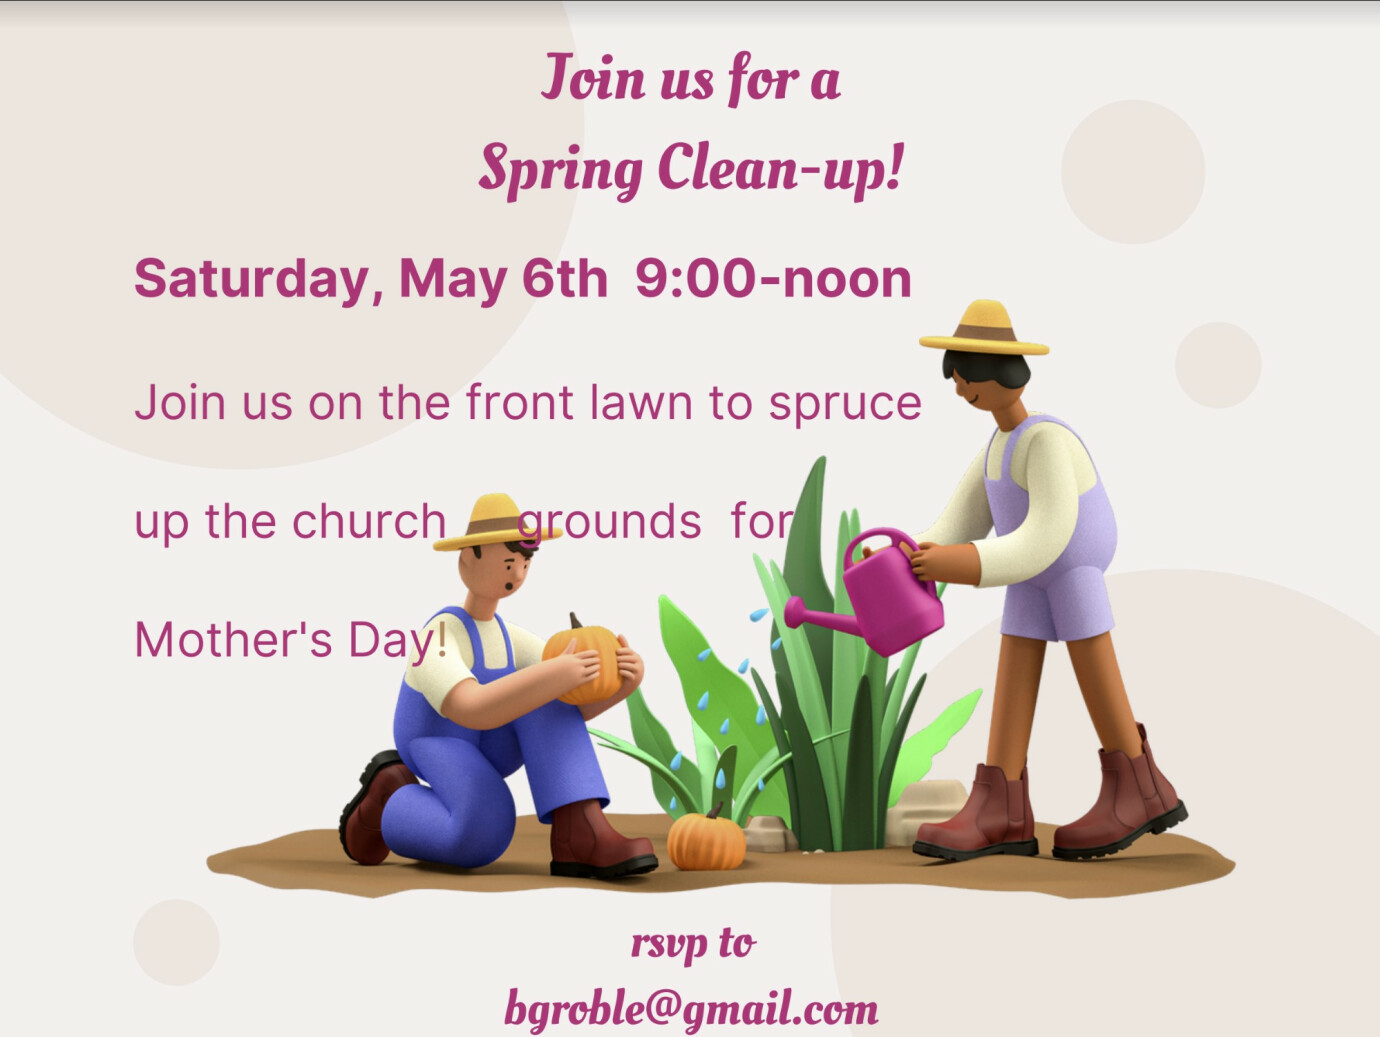 Spring Clean-up!